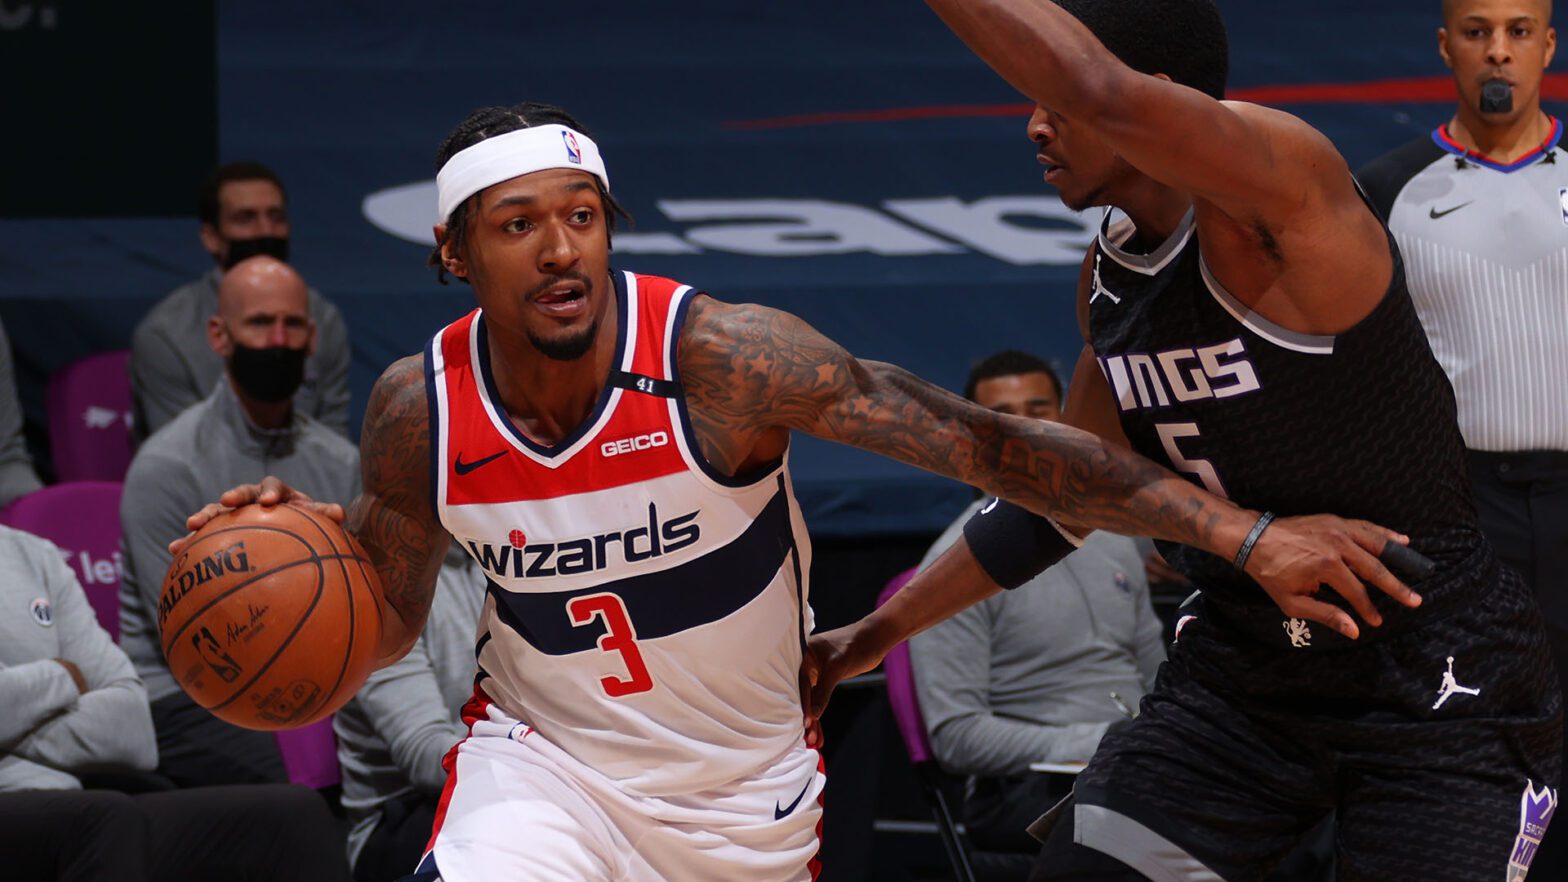 Wizards’ Bradley Beal Expected To Sign $248 Million Supermax